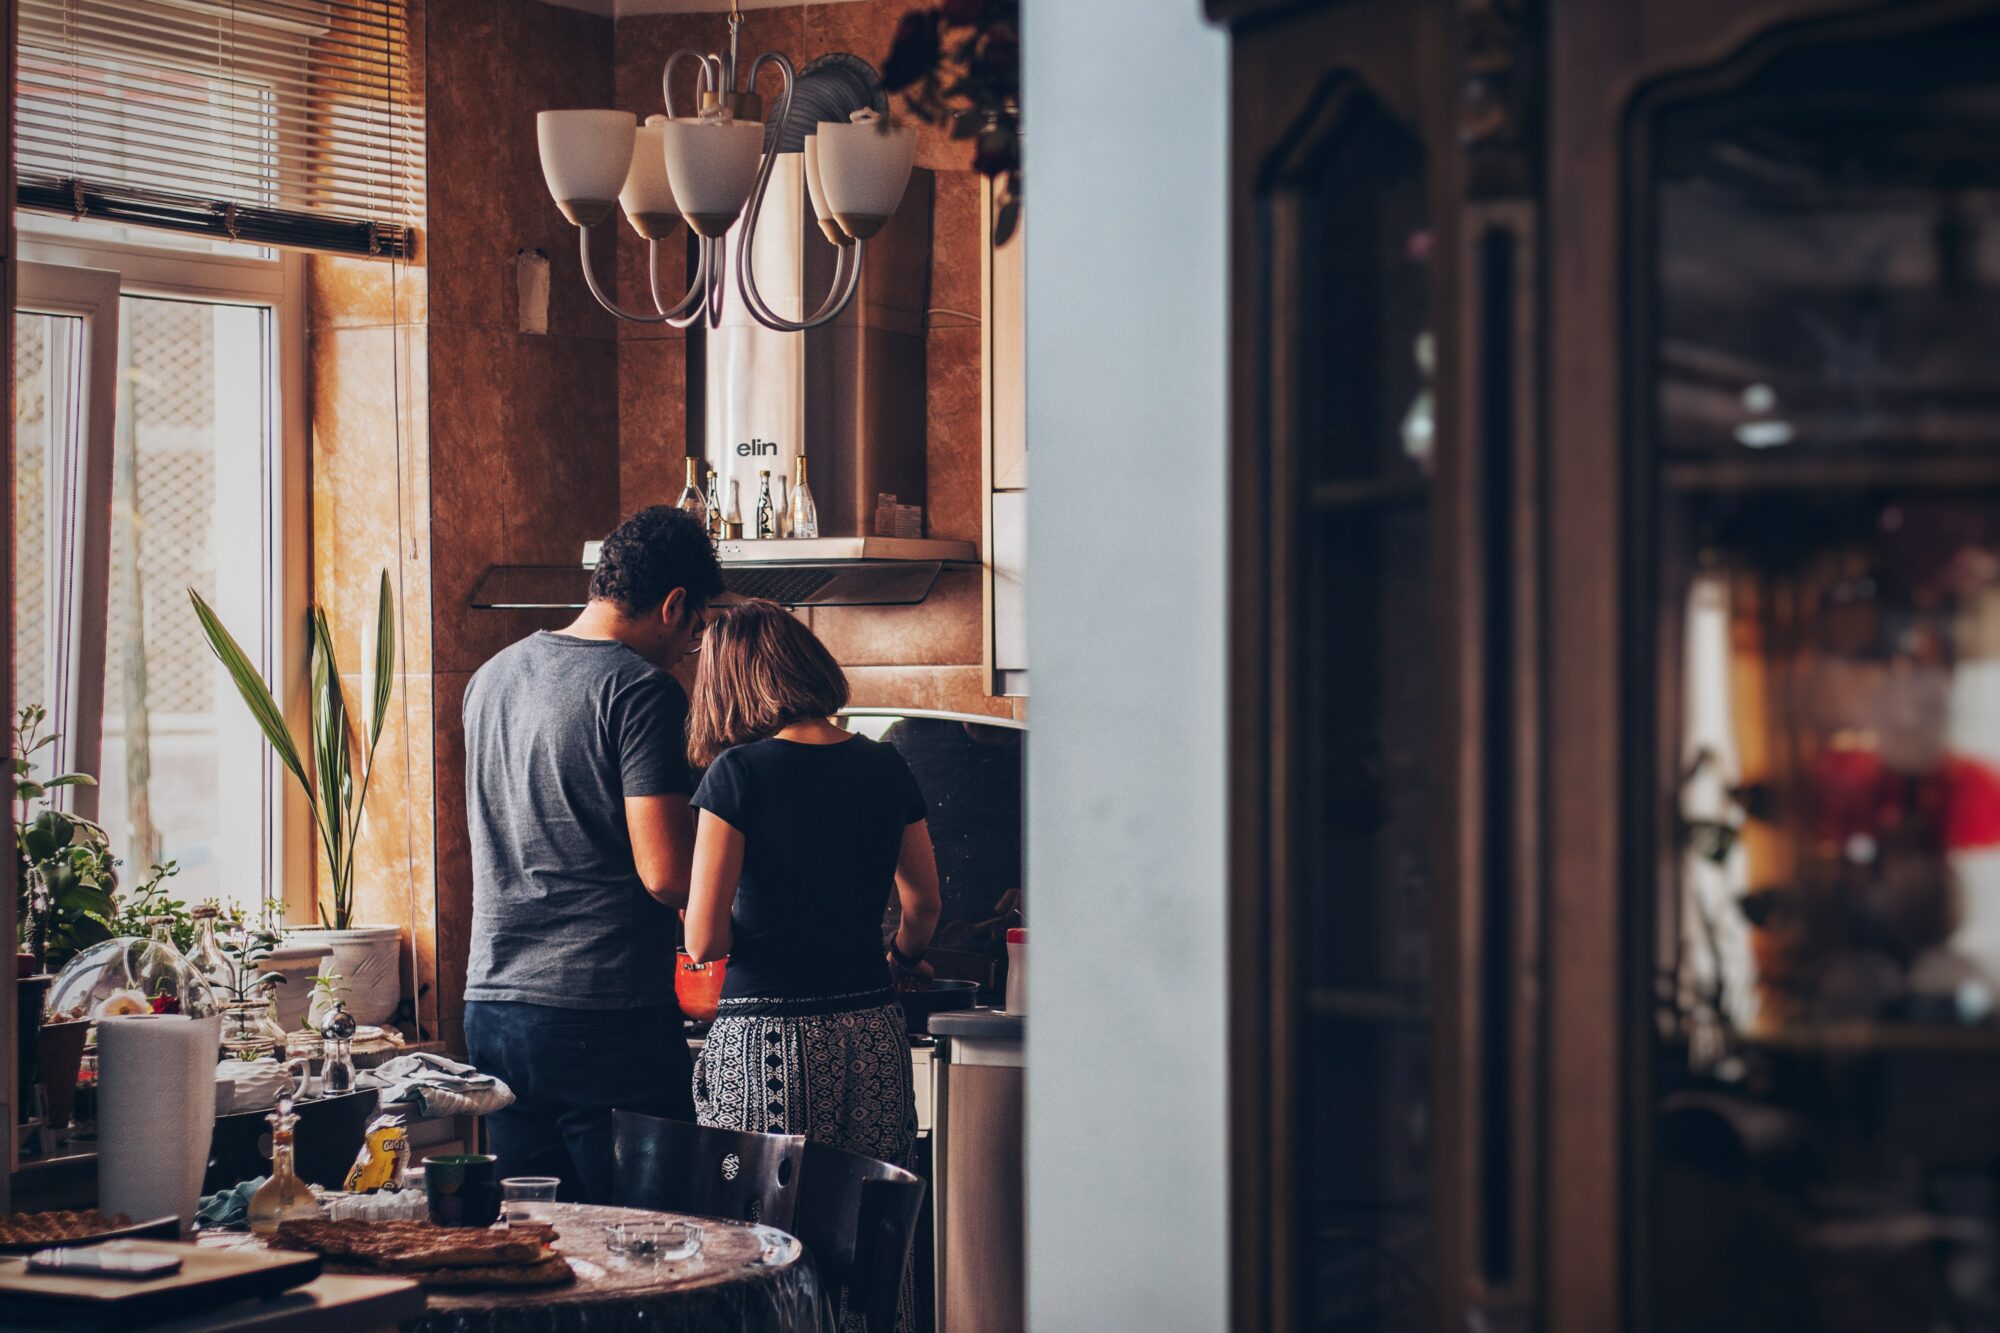 couple cooking in kitchen